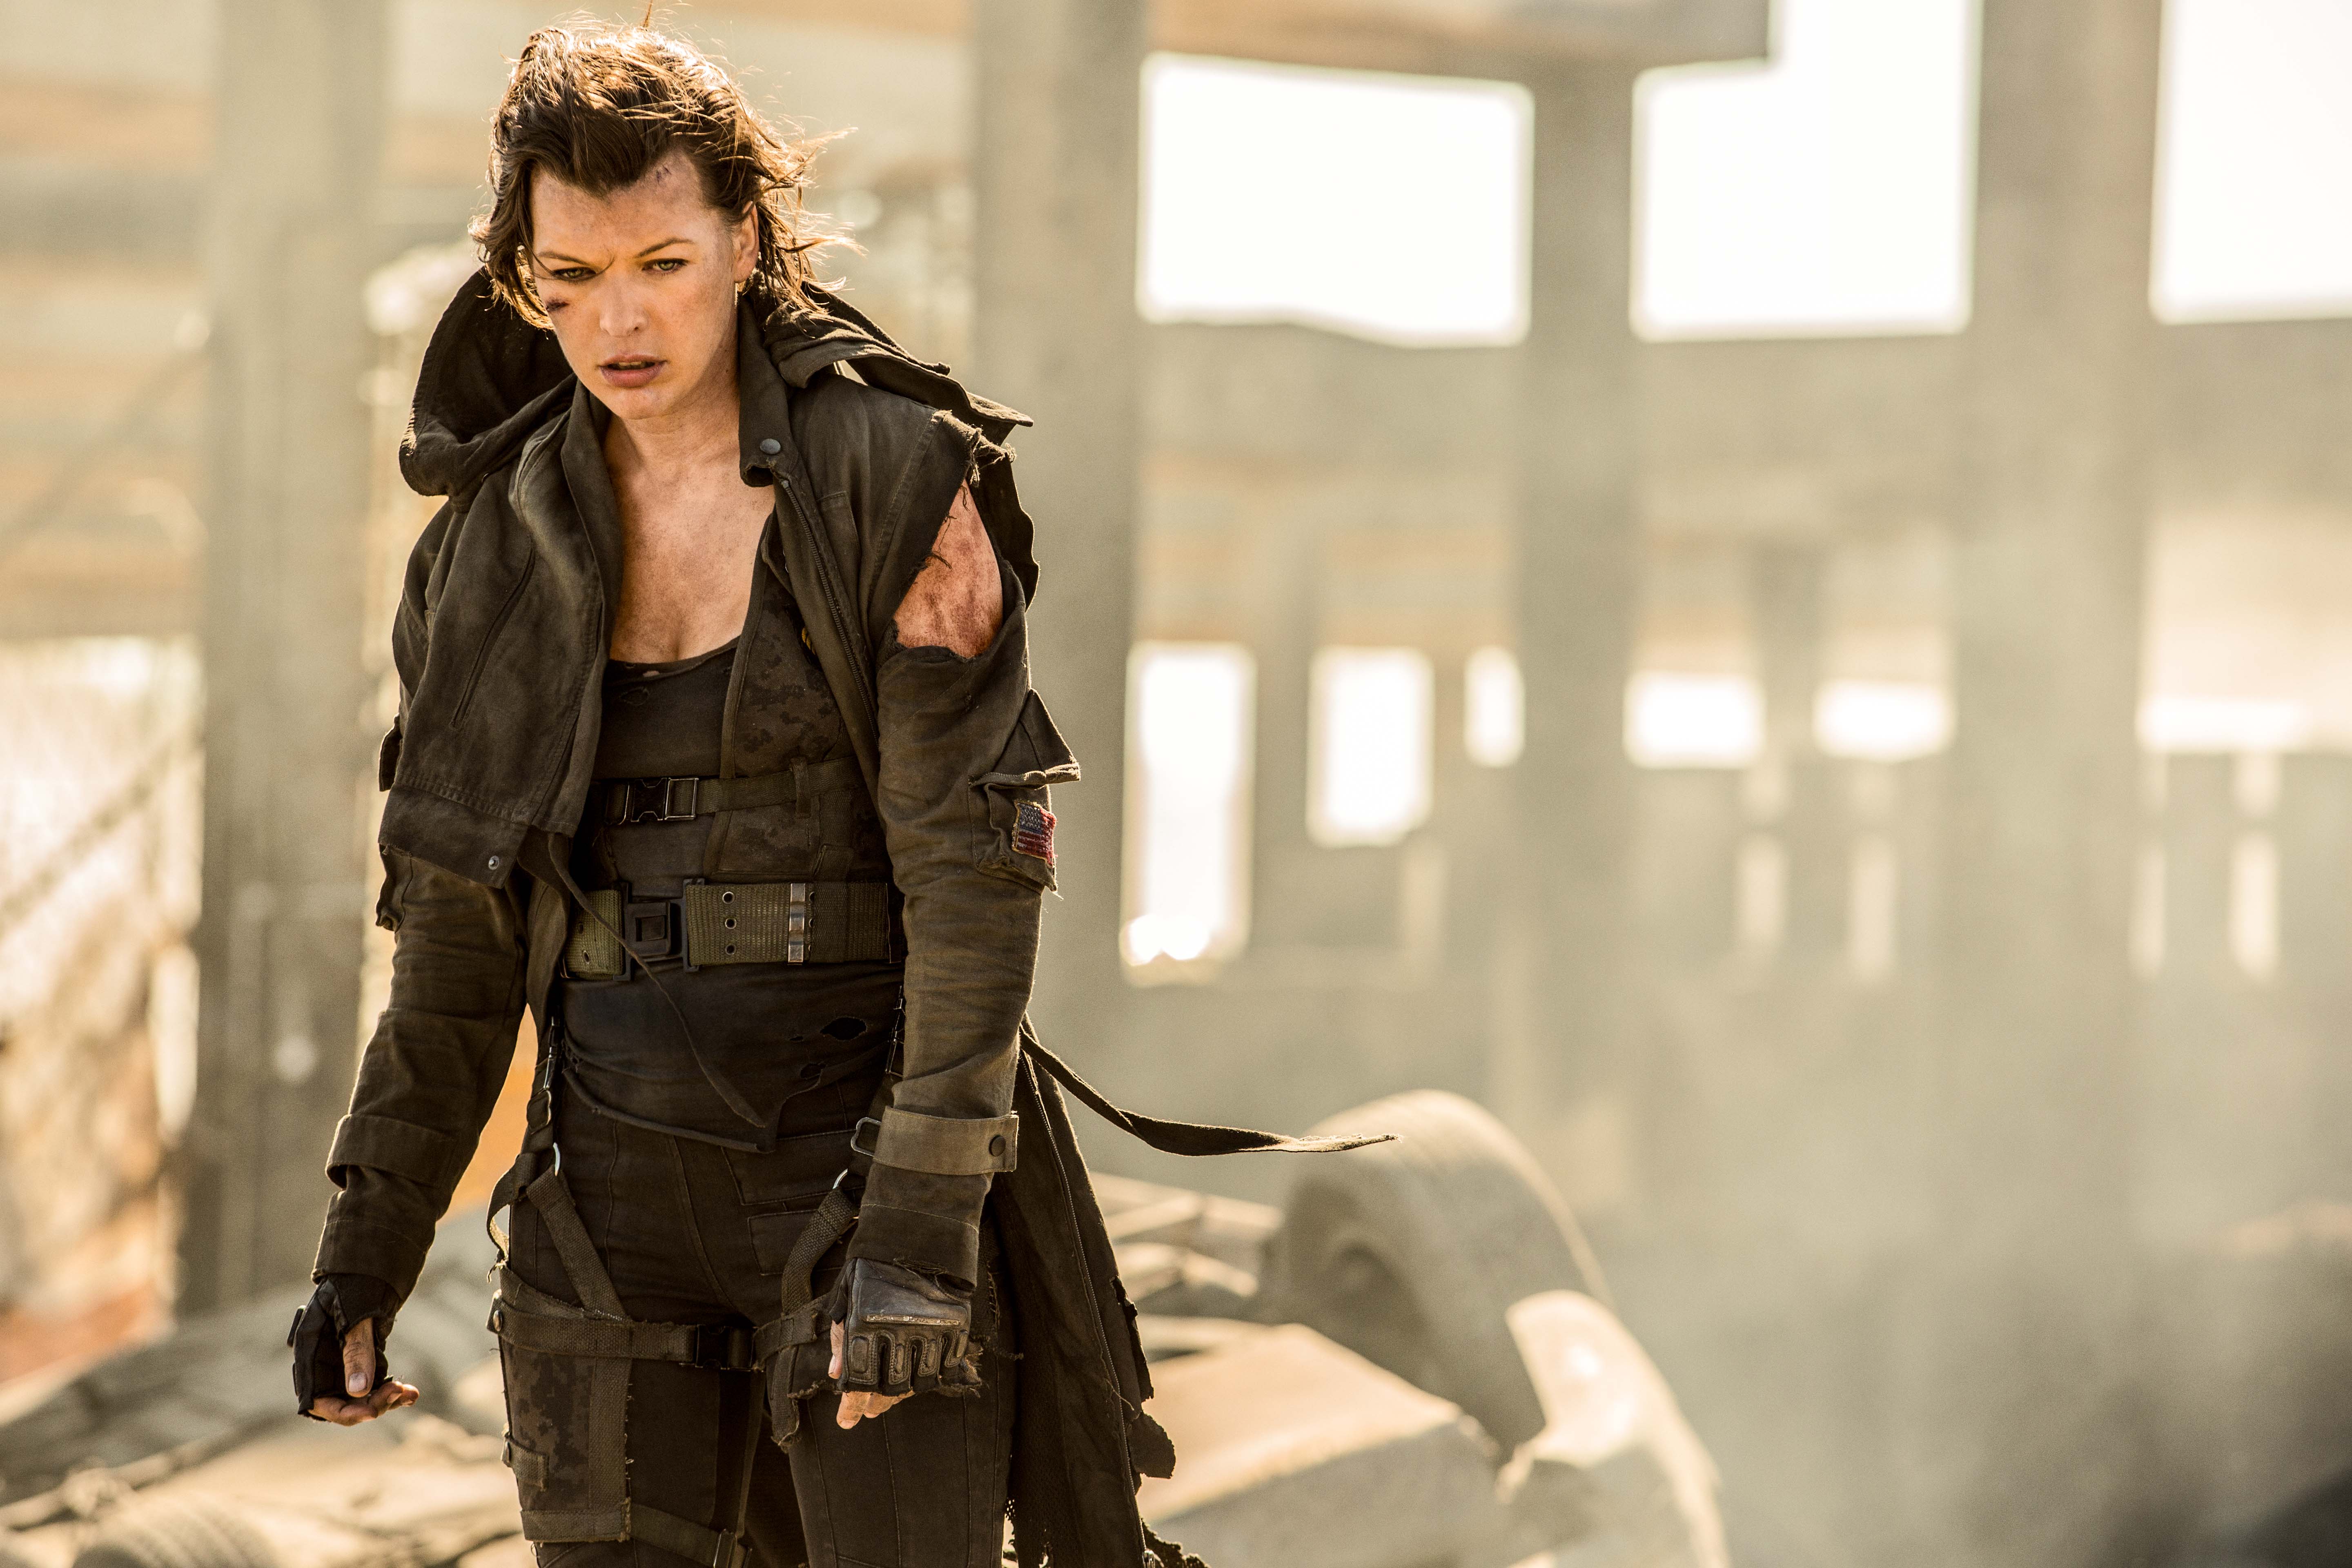 Image gallery for Resident Evil: The Final Chapter (2017) - Filmaffinity